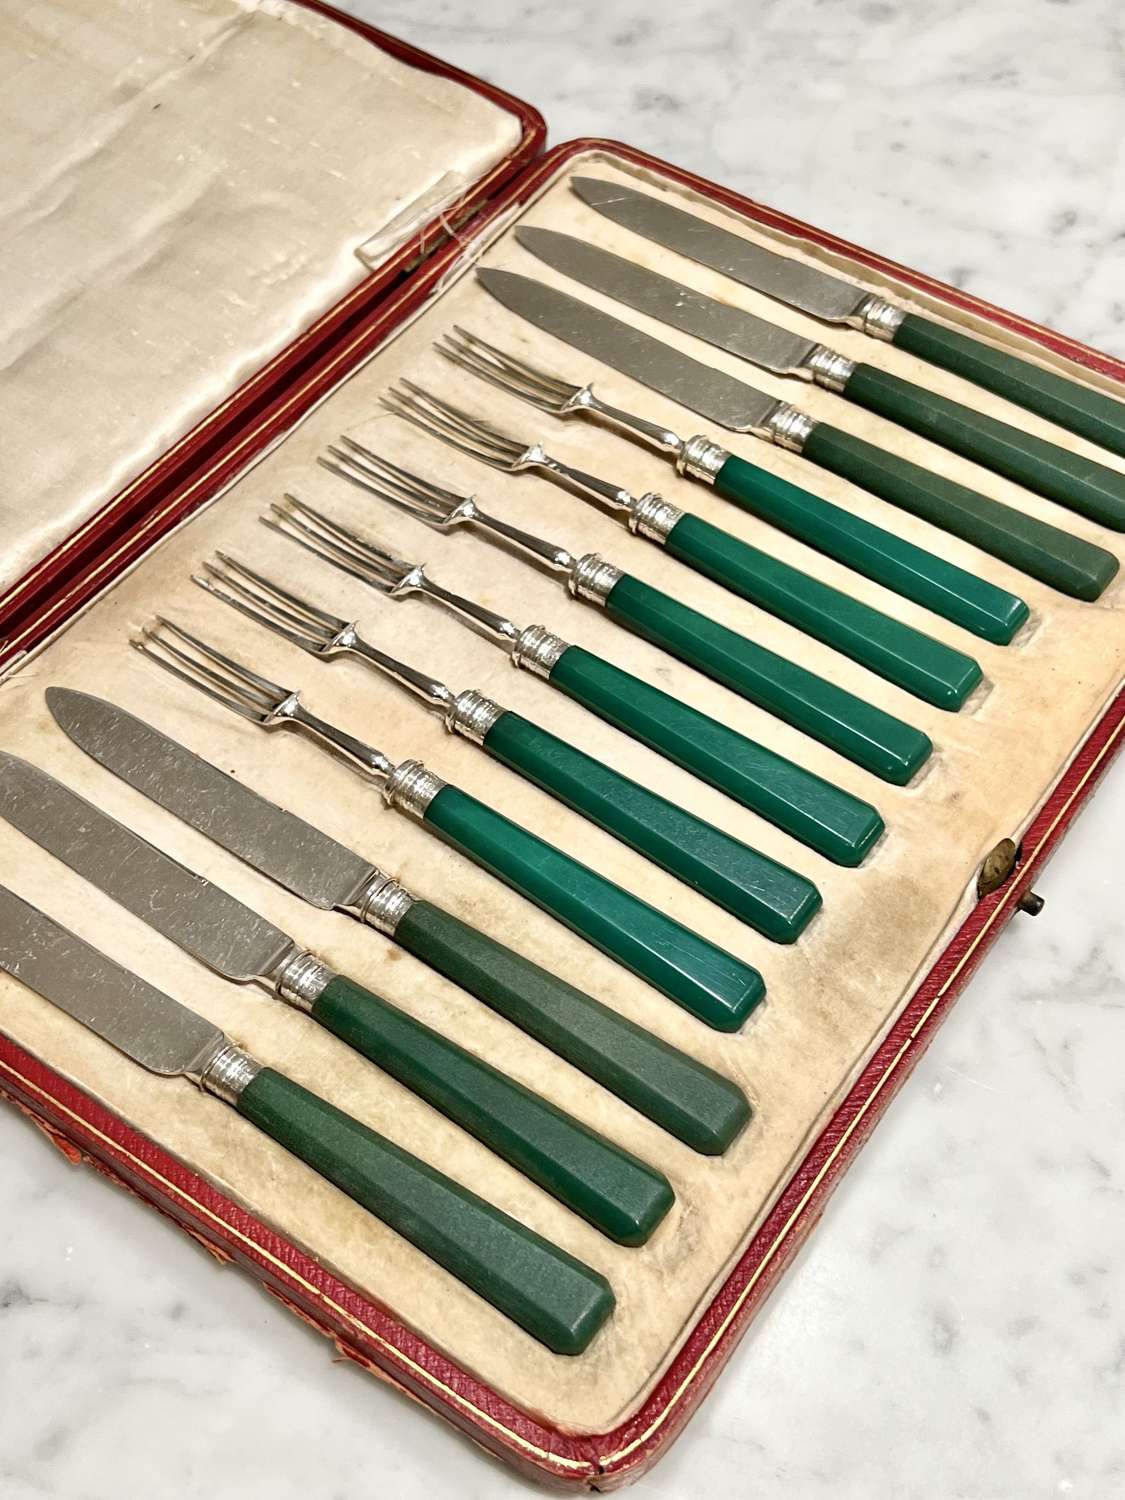 Art Deco Silver Dessert Knives Forks With Emerald Green Handles